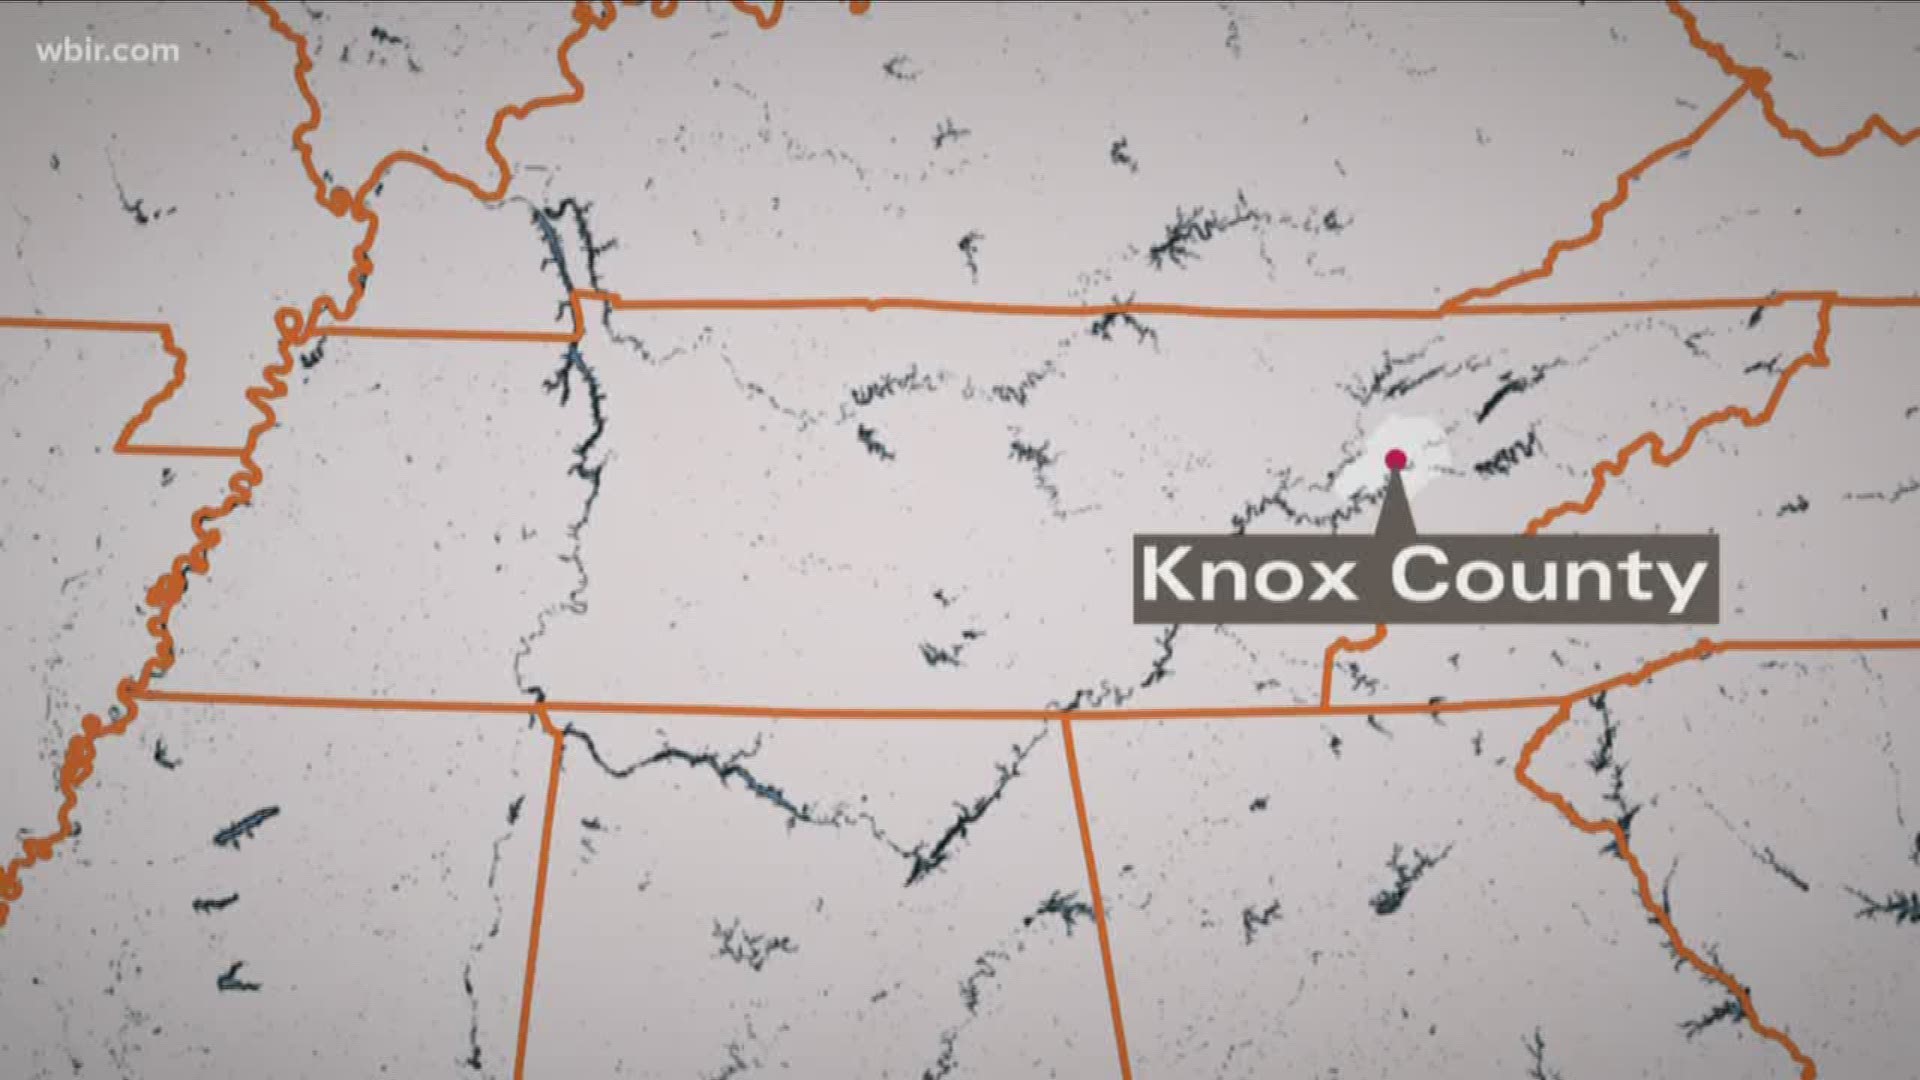 Knox County may not be the third most populated county in Tennessee for long. That's according to a new study from the University of Tennessee.